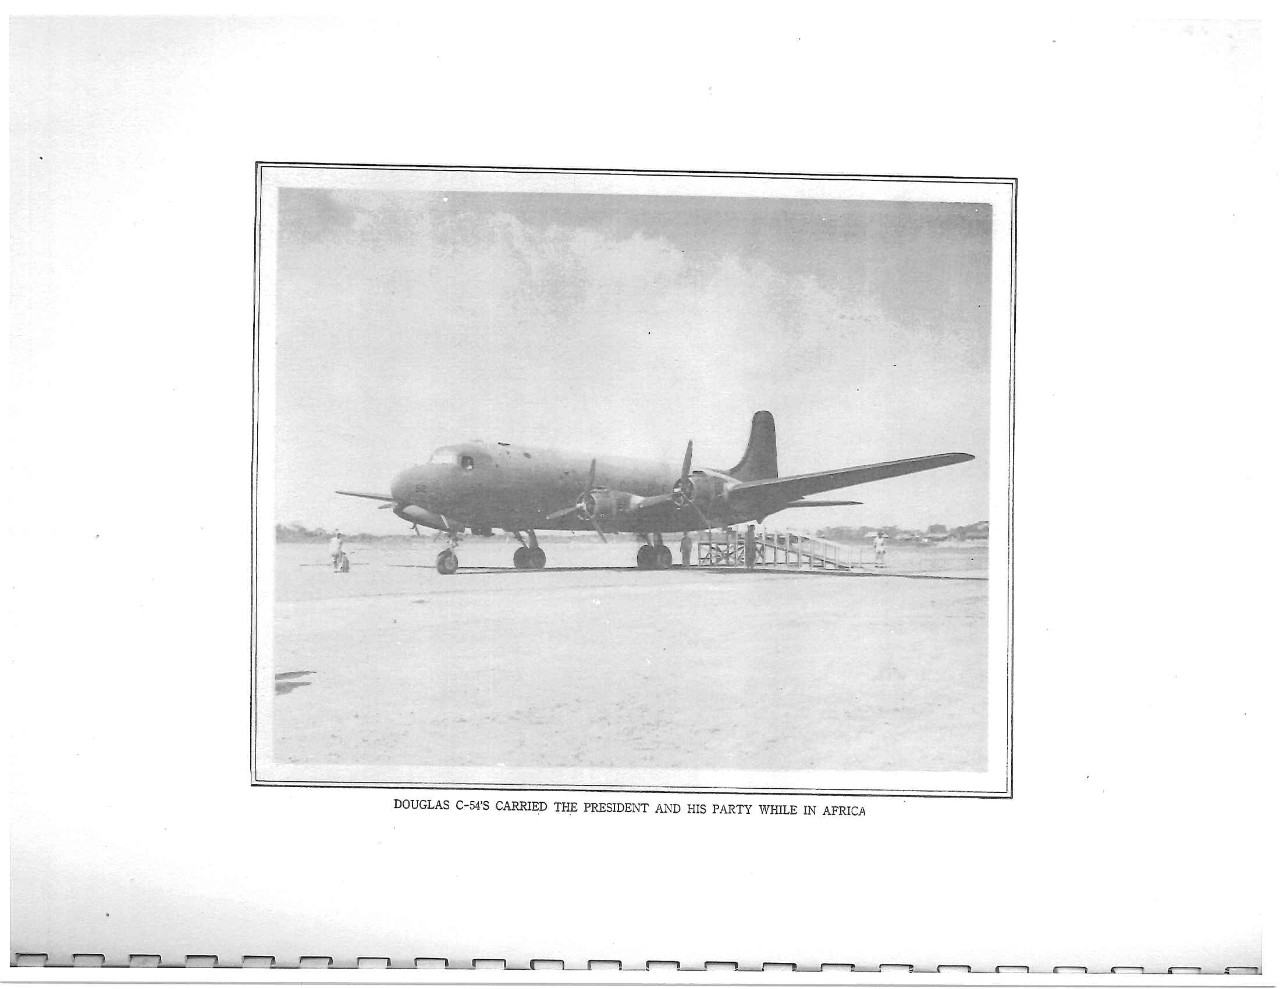 Douglas C-54's carried the President and his party while in Africa